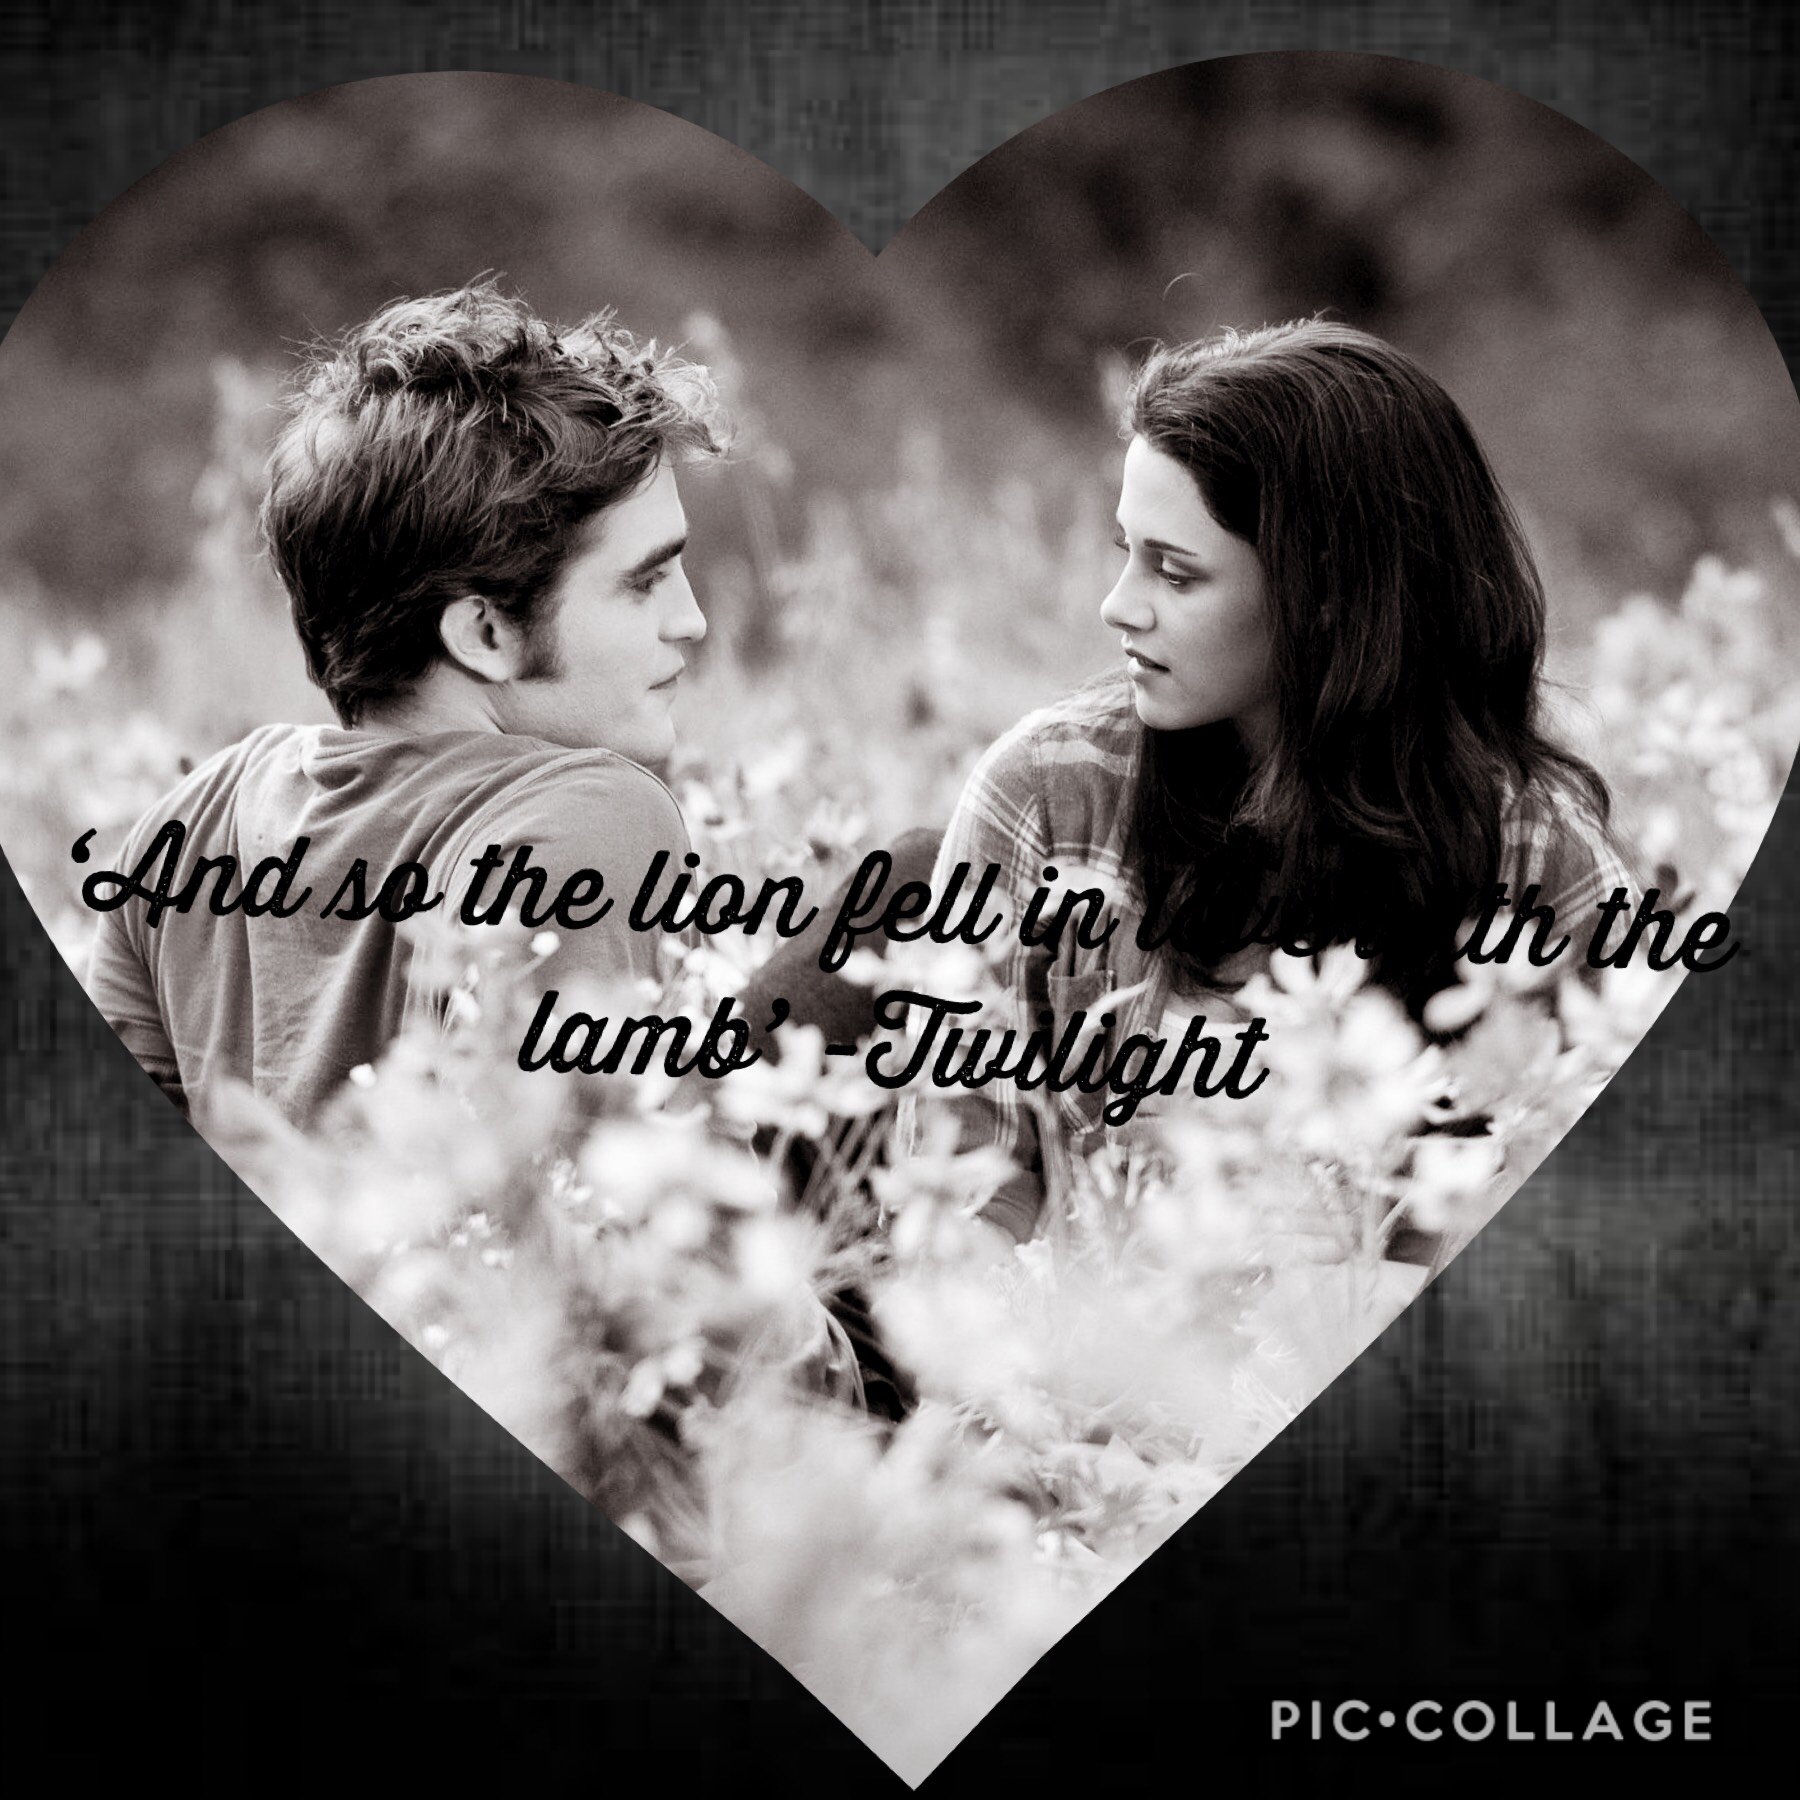 And so the lion fell in love with the lamb..... - Edward Cullen, Twilight.